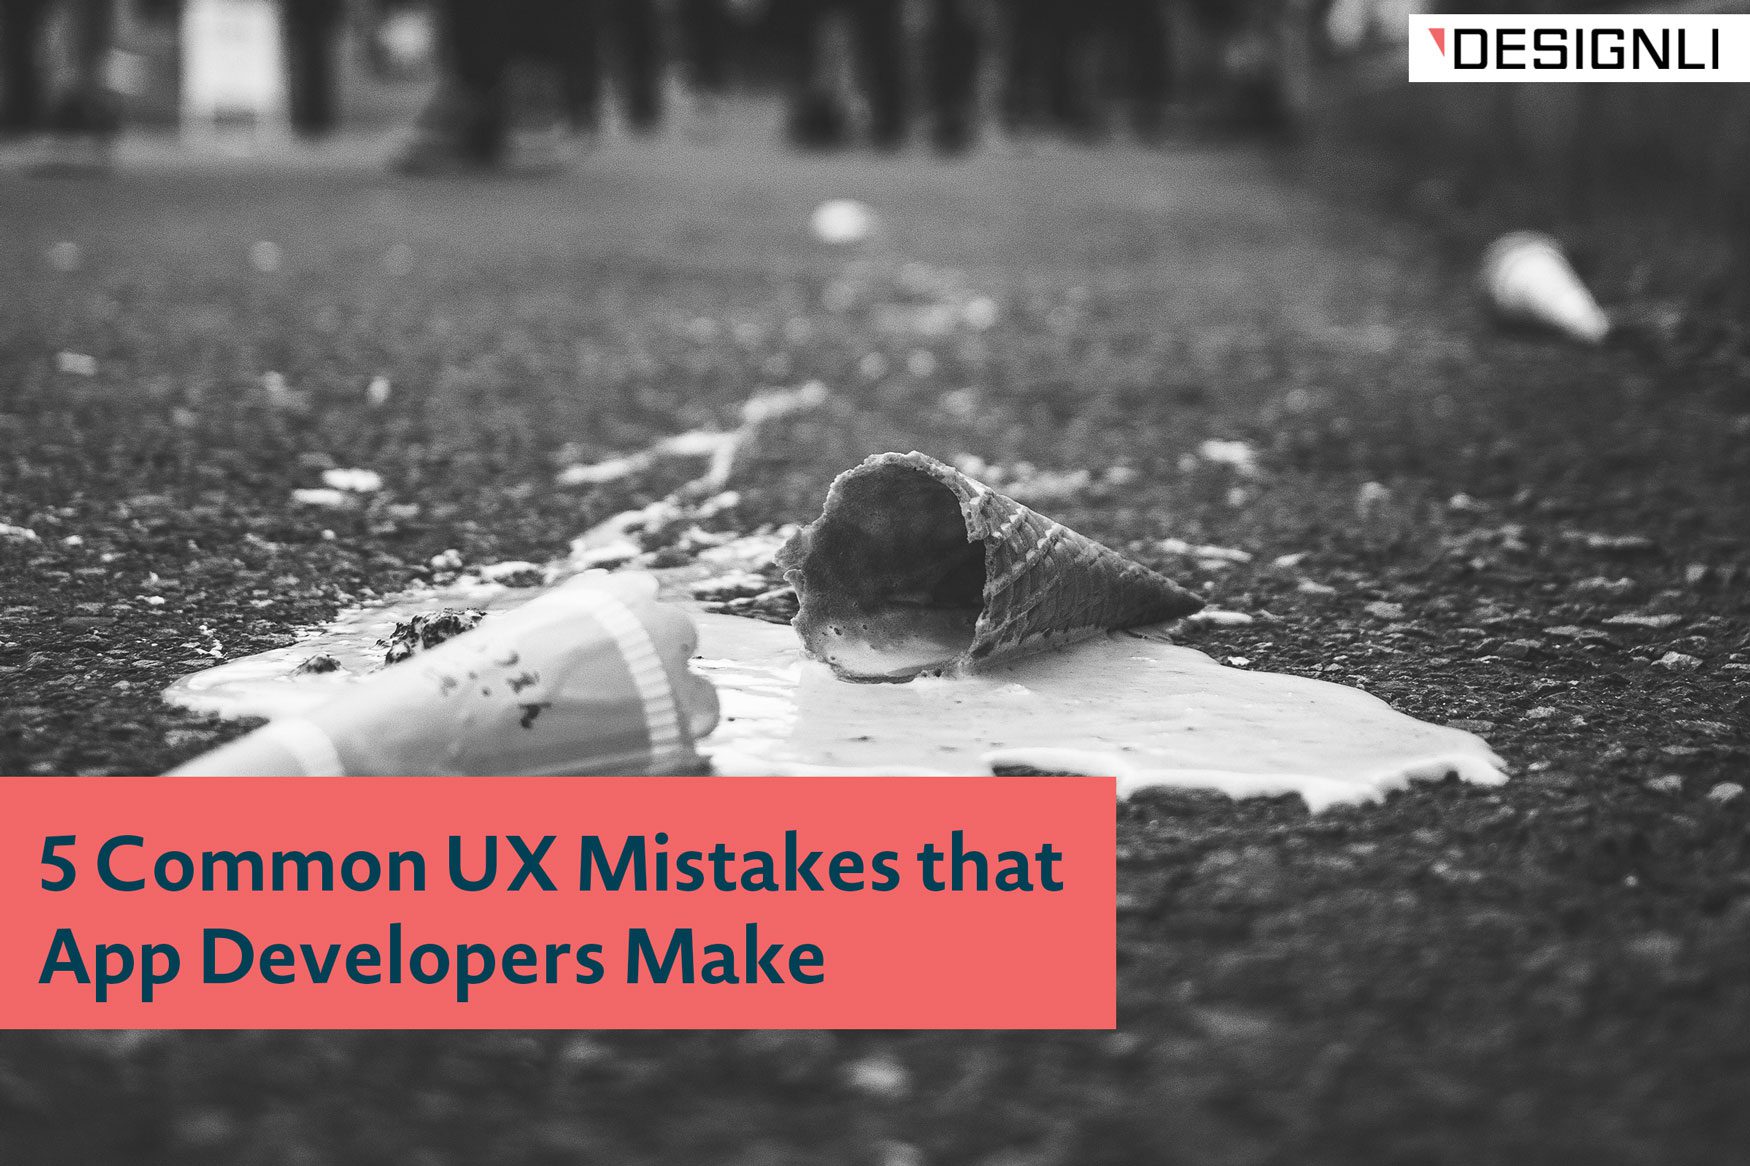 5 Common UX Mistakes that App Developers Make